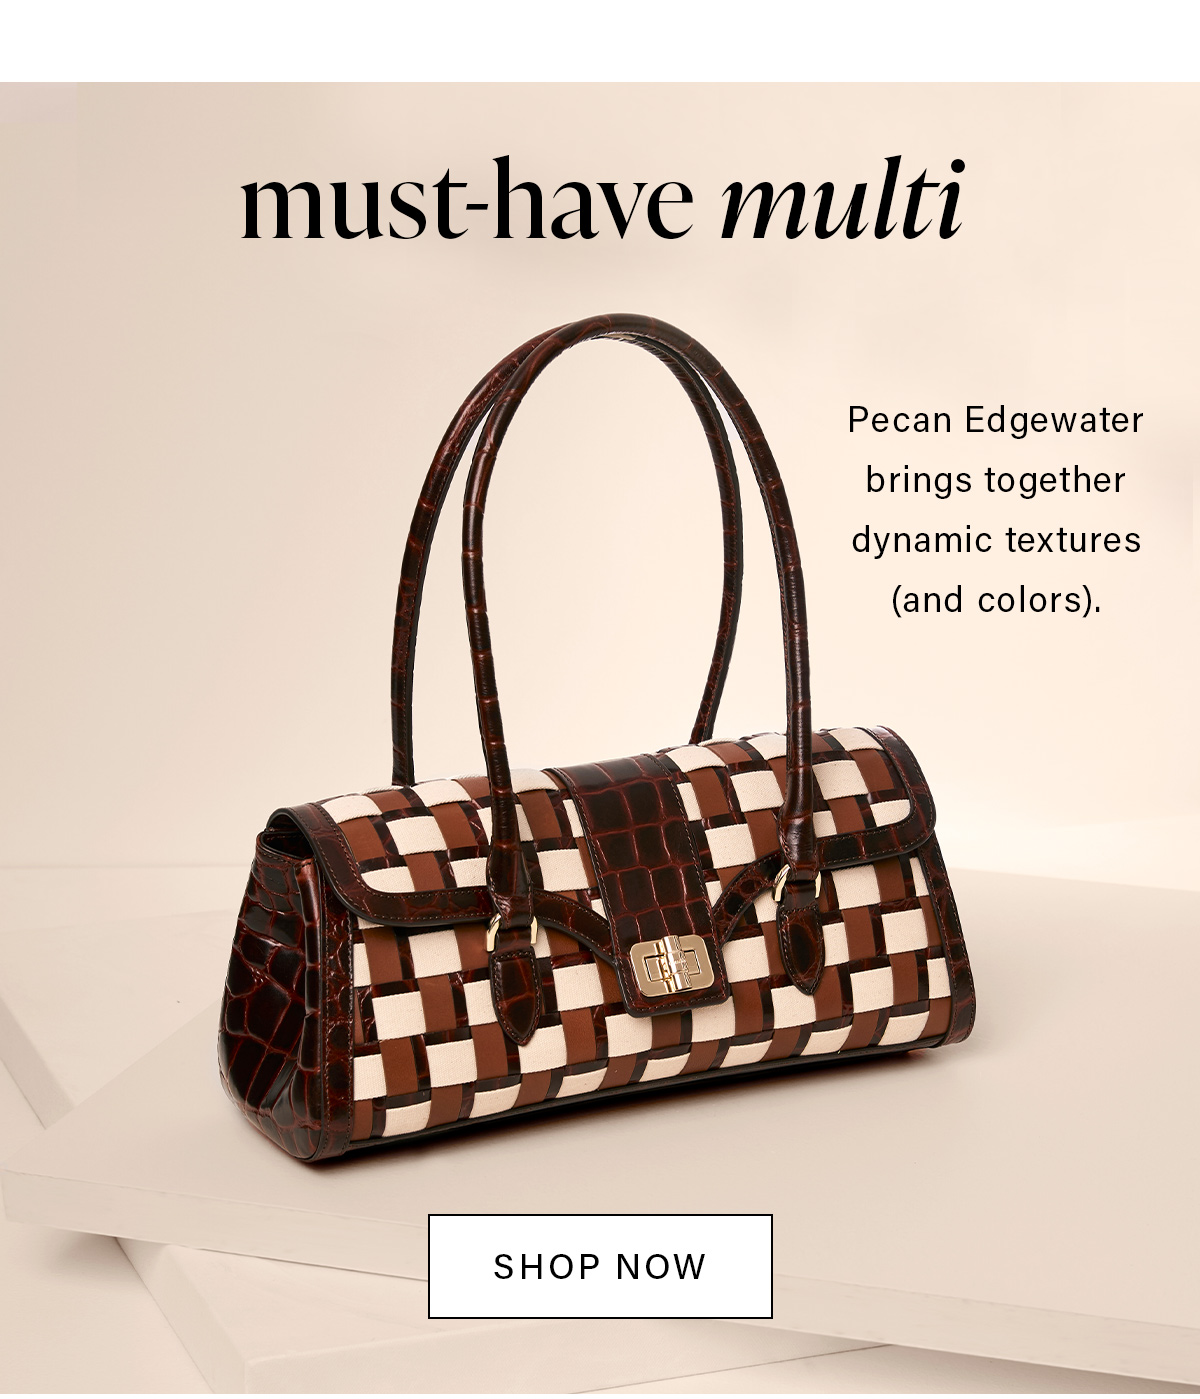 must-have multi Pecan Edgewater brings together dynamic textures (and colors). SHOP NOW